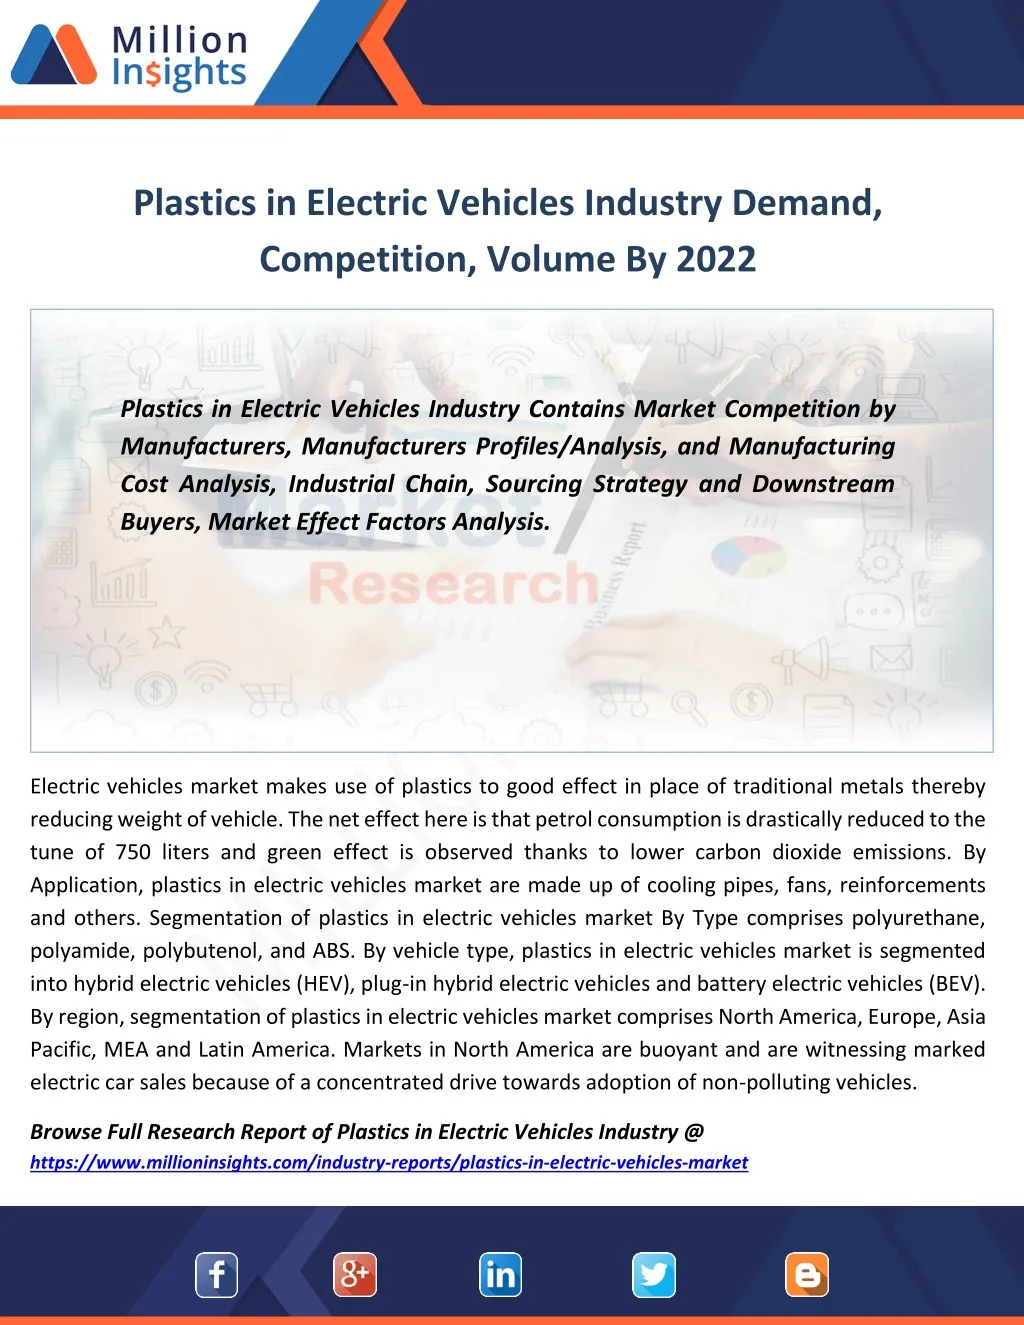 PPT Plastics in Electric Vehicles Market Drivers, Capacity